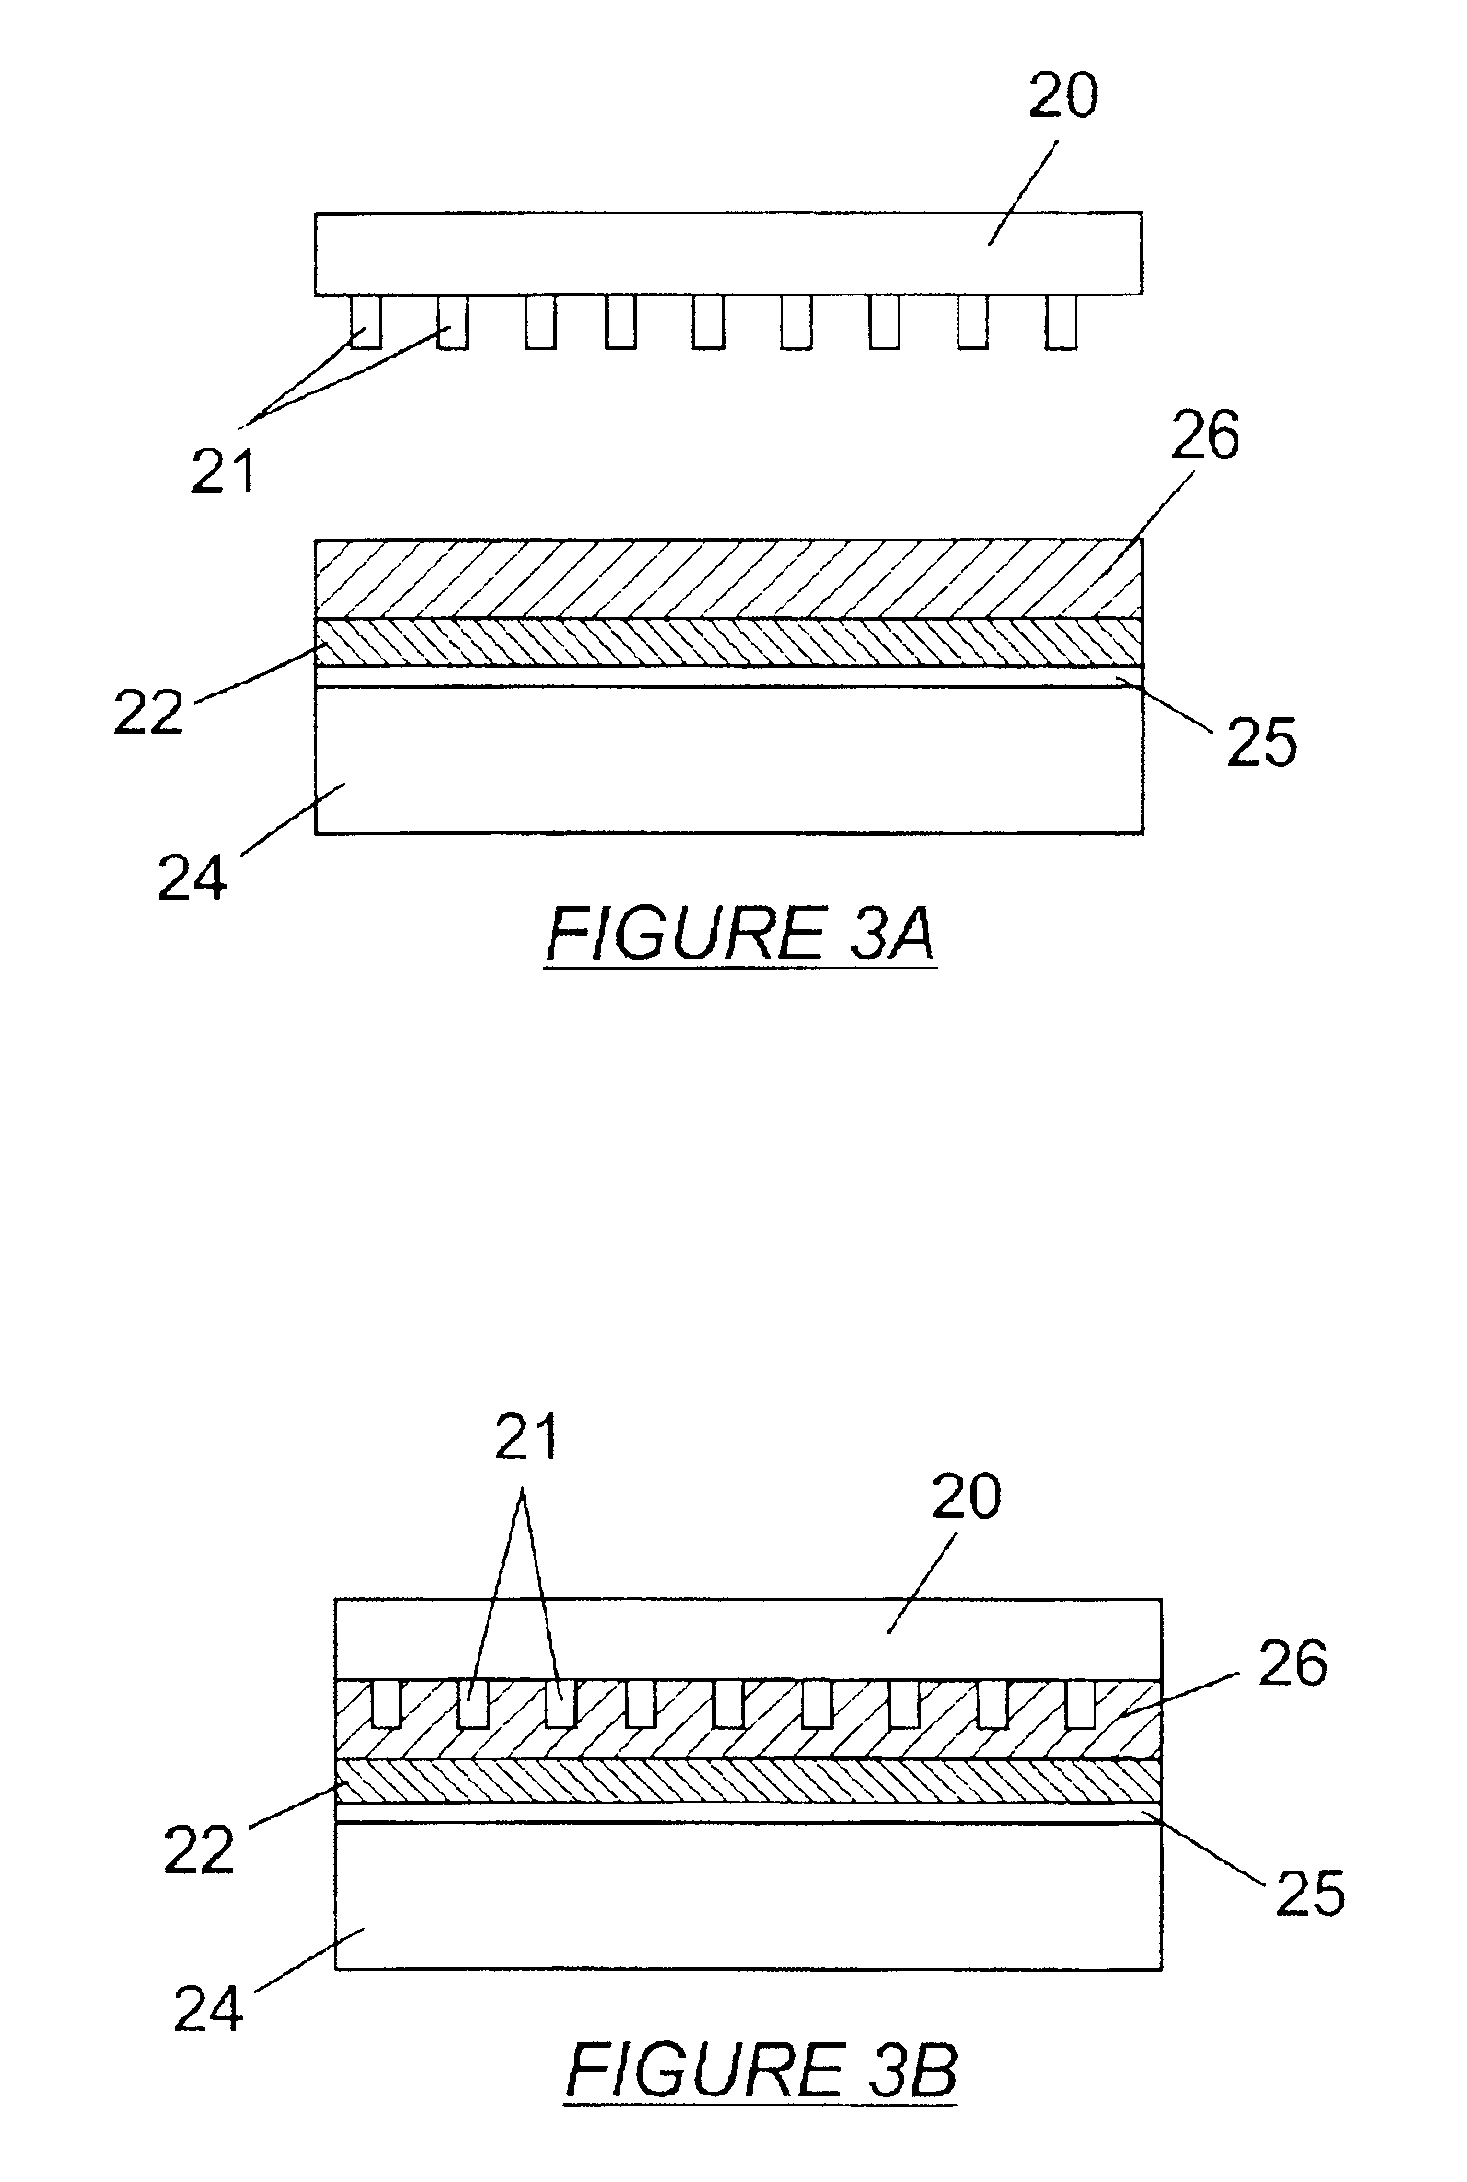 Method for fabricating an integrated optical isolator and a novel wire grid structure